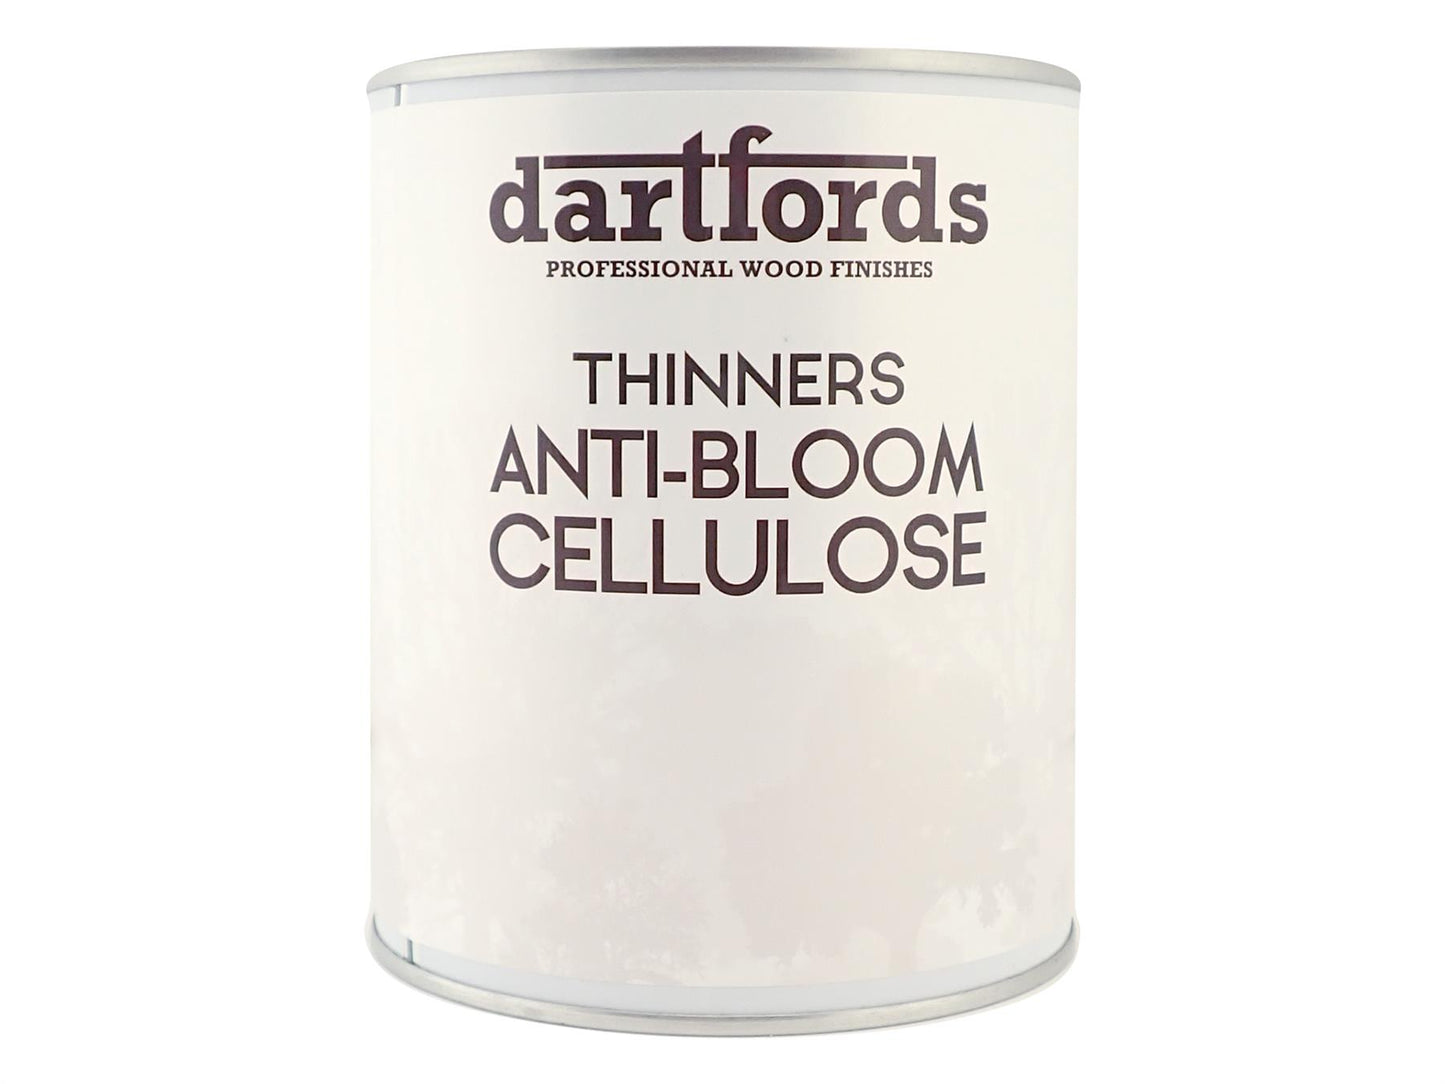 dartfords Anti-Bloom Cellulose Thinners - 1 litre Tin